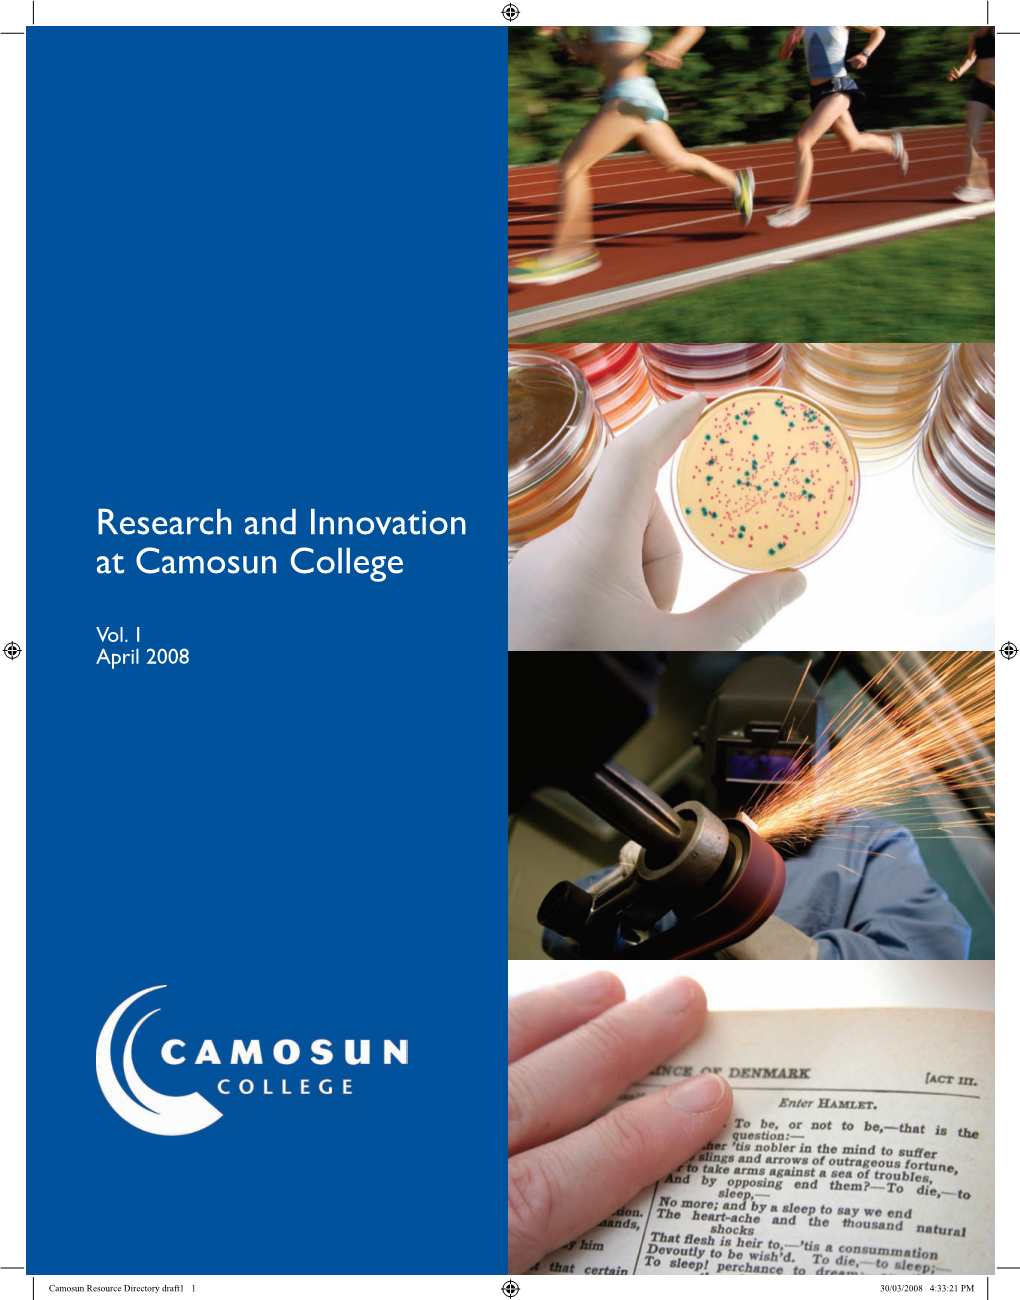 Research and Innovation at Camosun College